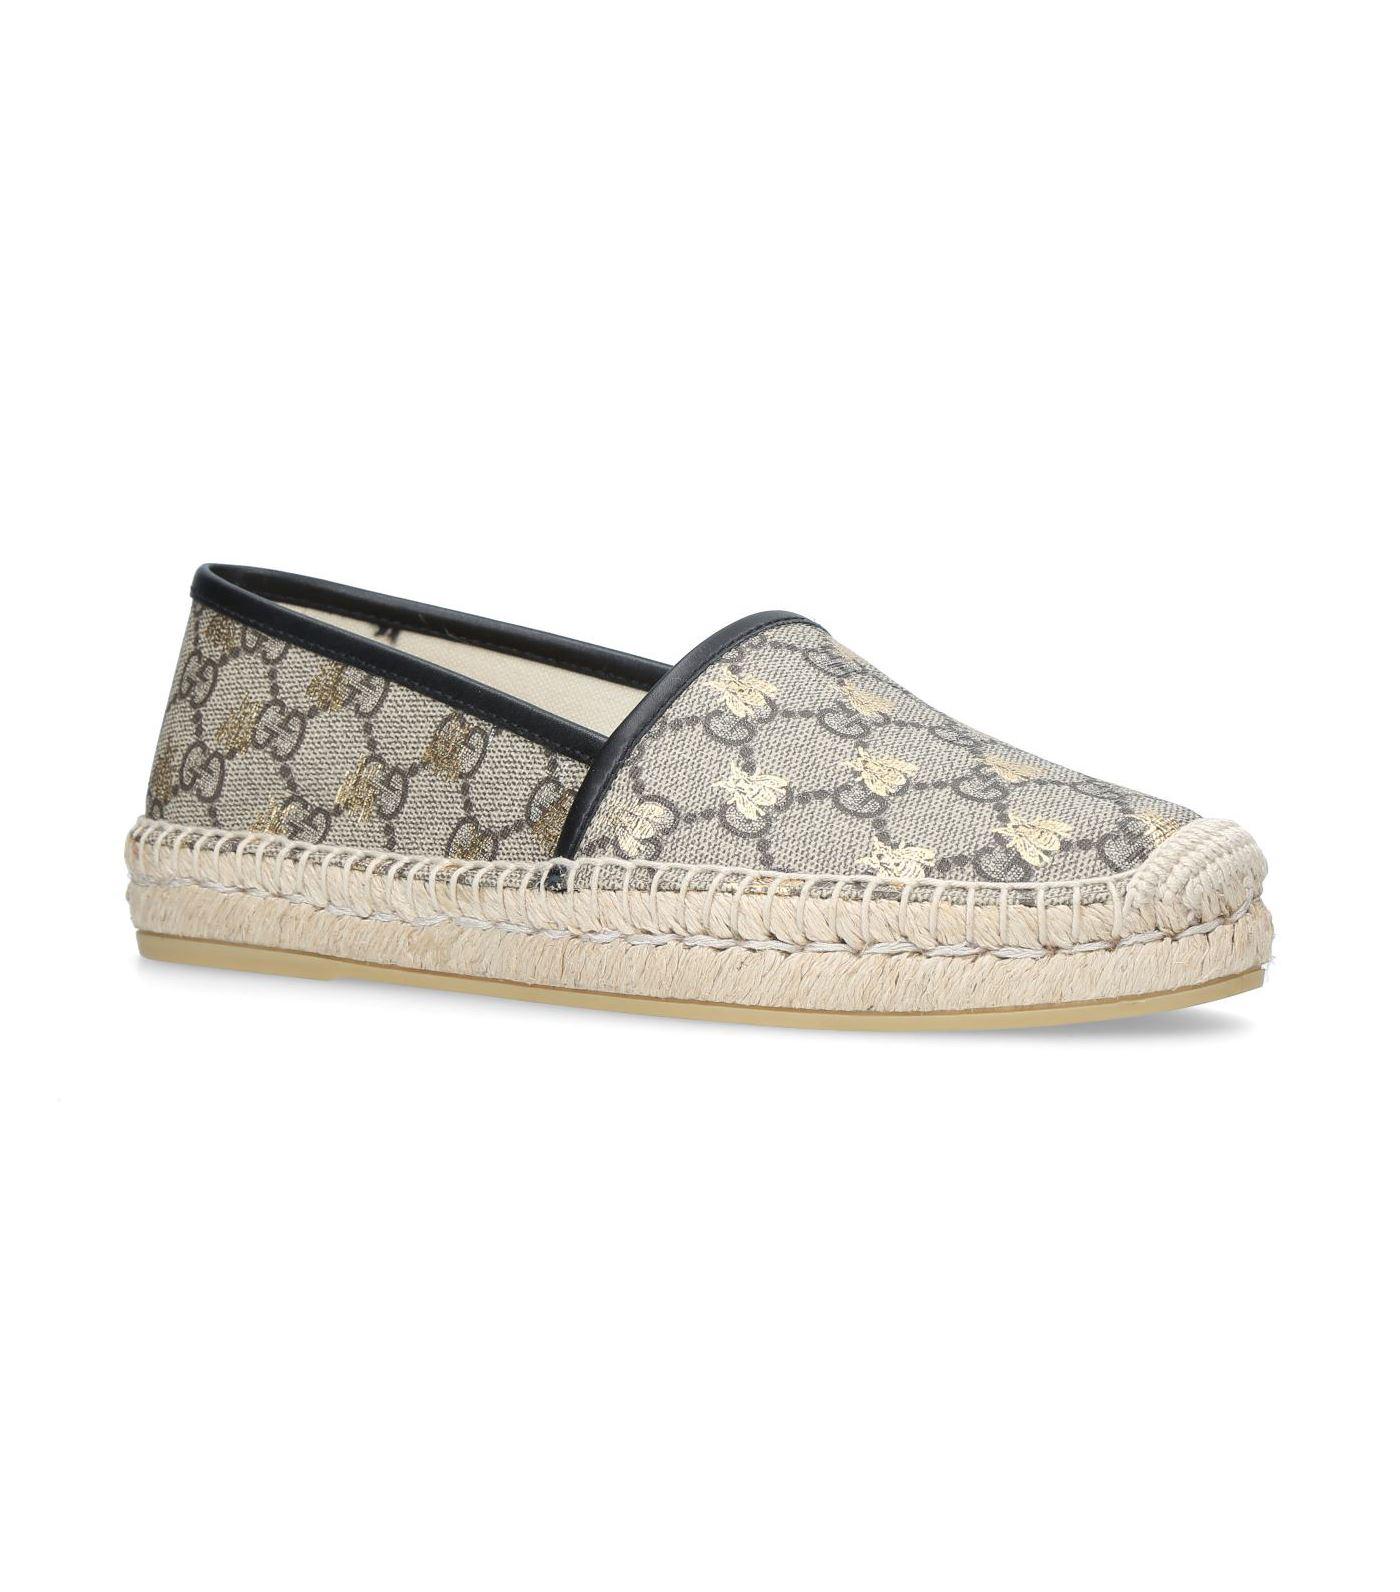 Gucci Canvas GG Supreme Bee Espadrilles in Beige (Natural) - Save 5% - Lyst